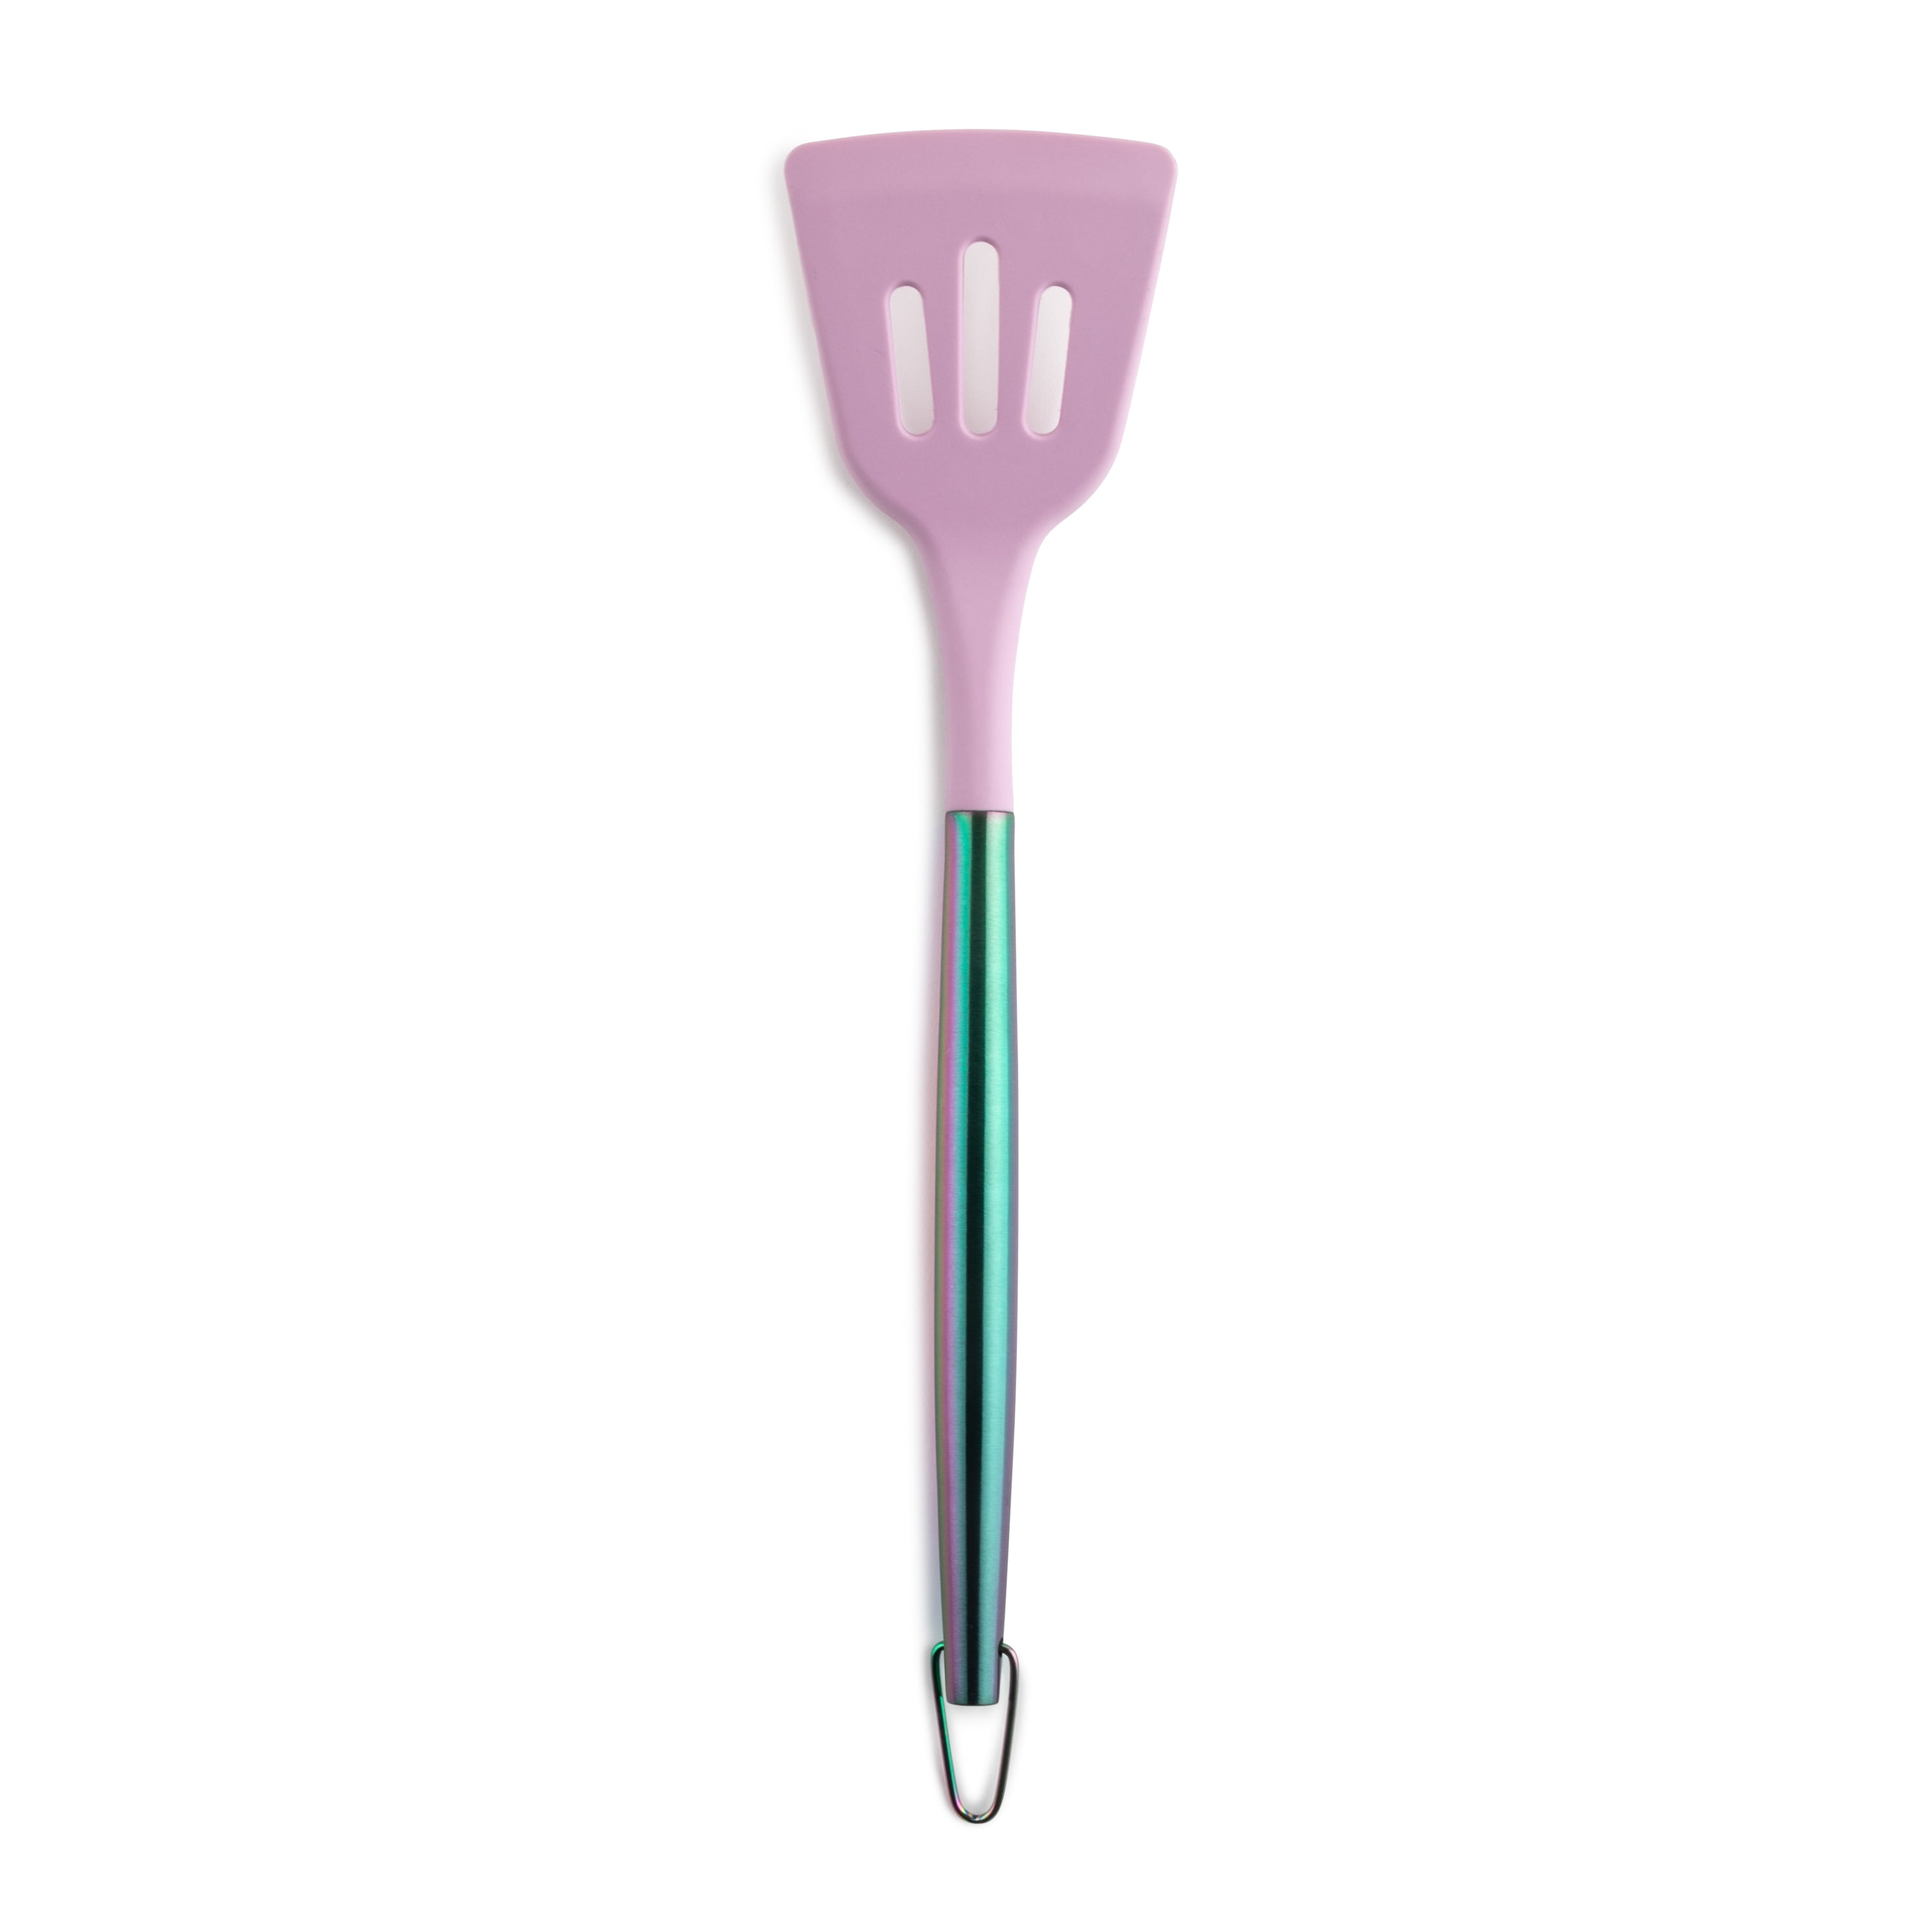 Shop for Flat Spatula Short Slotted Turner Stainless Steel for